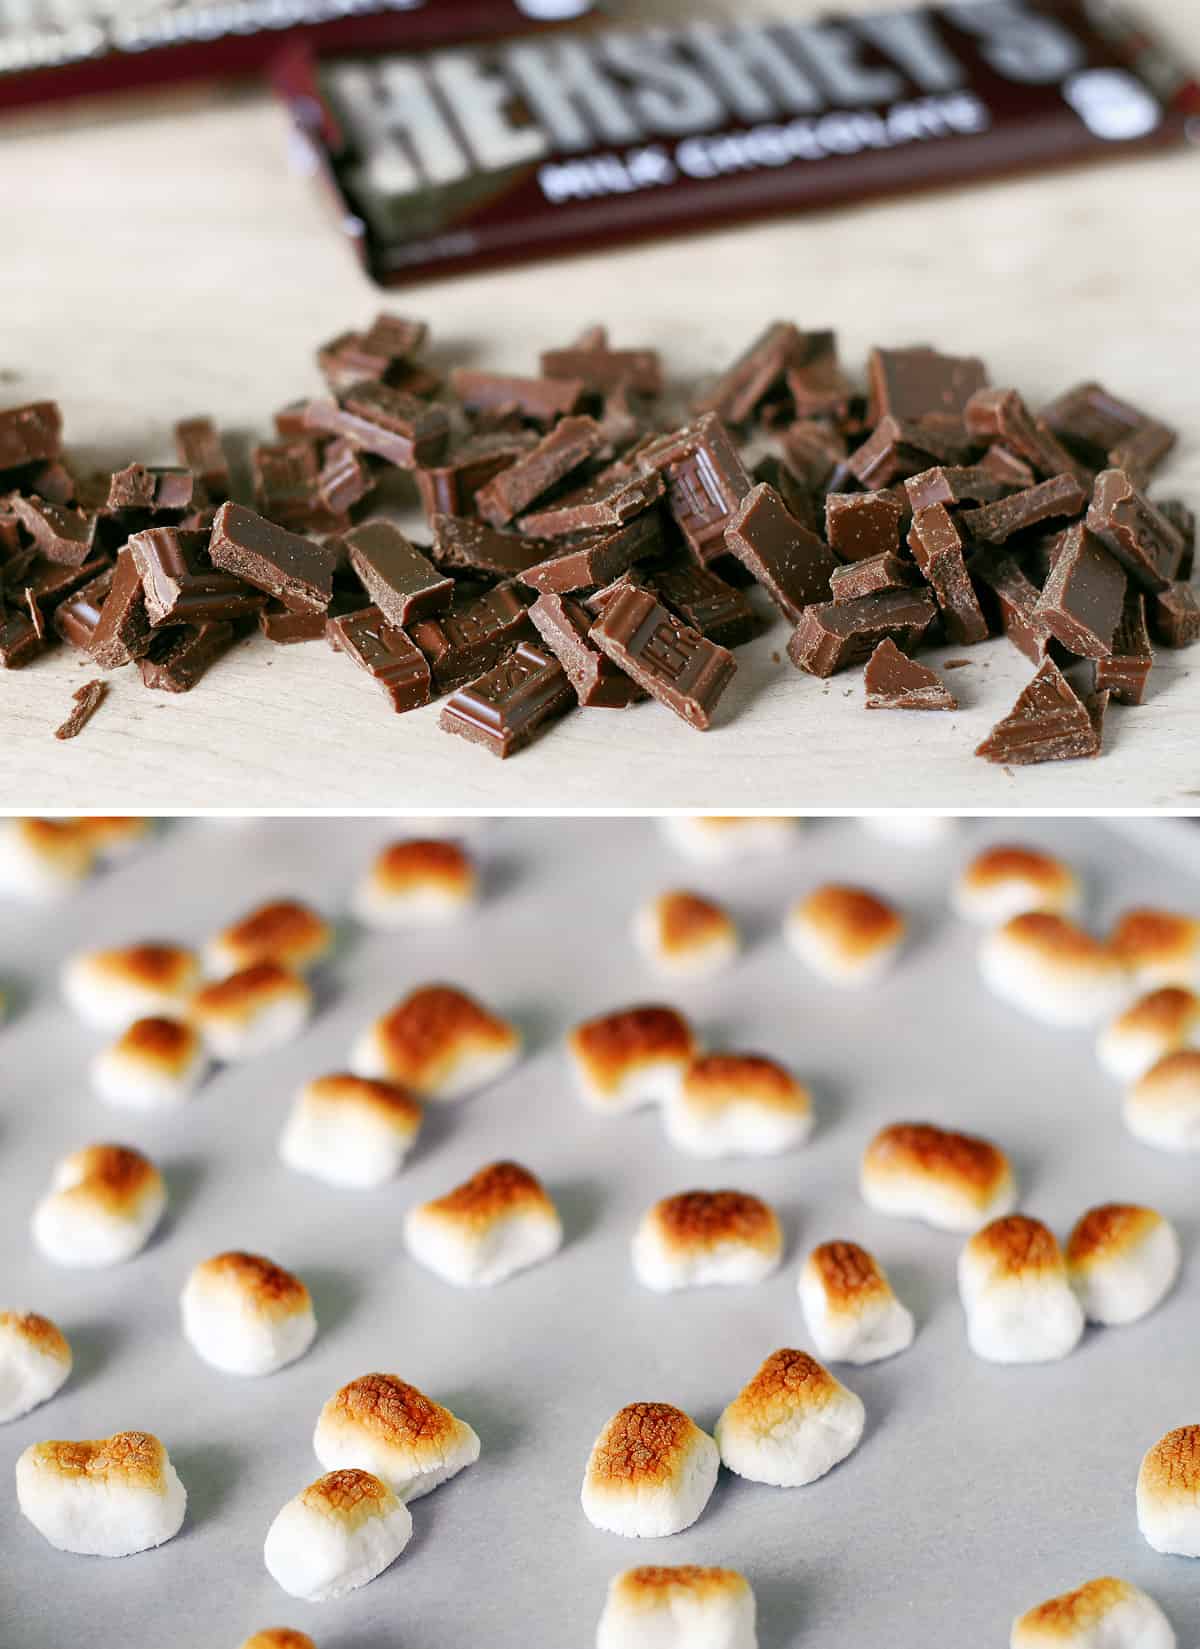 chopped chocolate bar and toasted marshmallows.